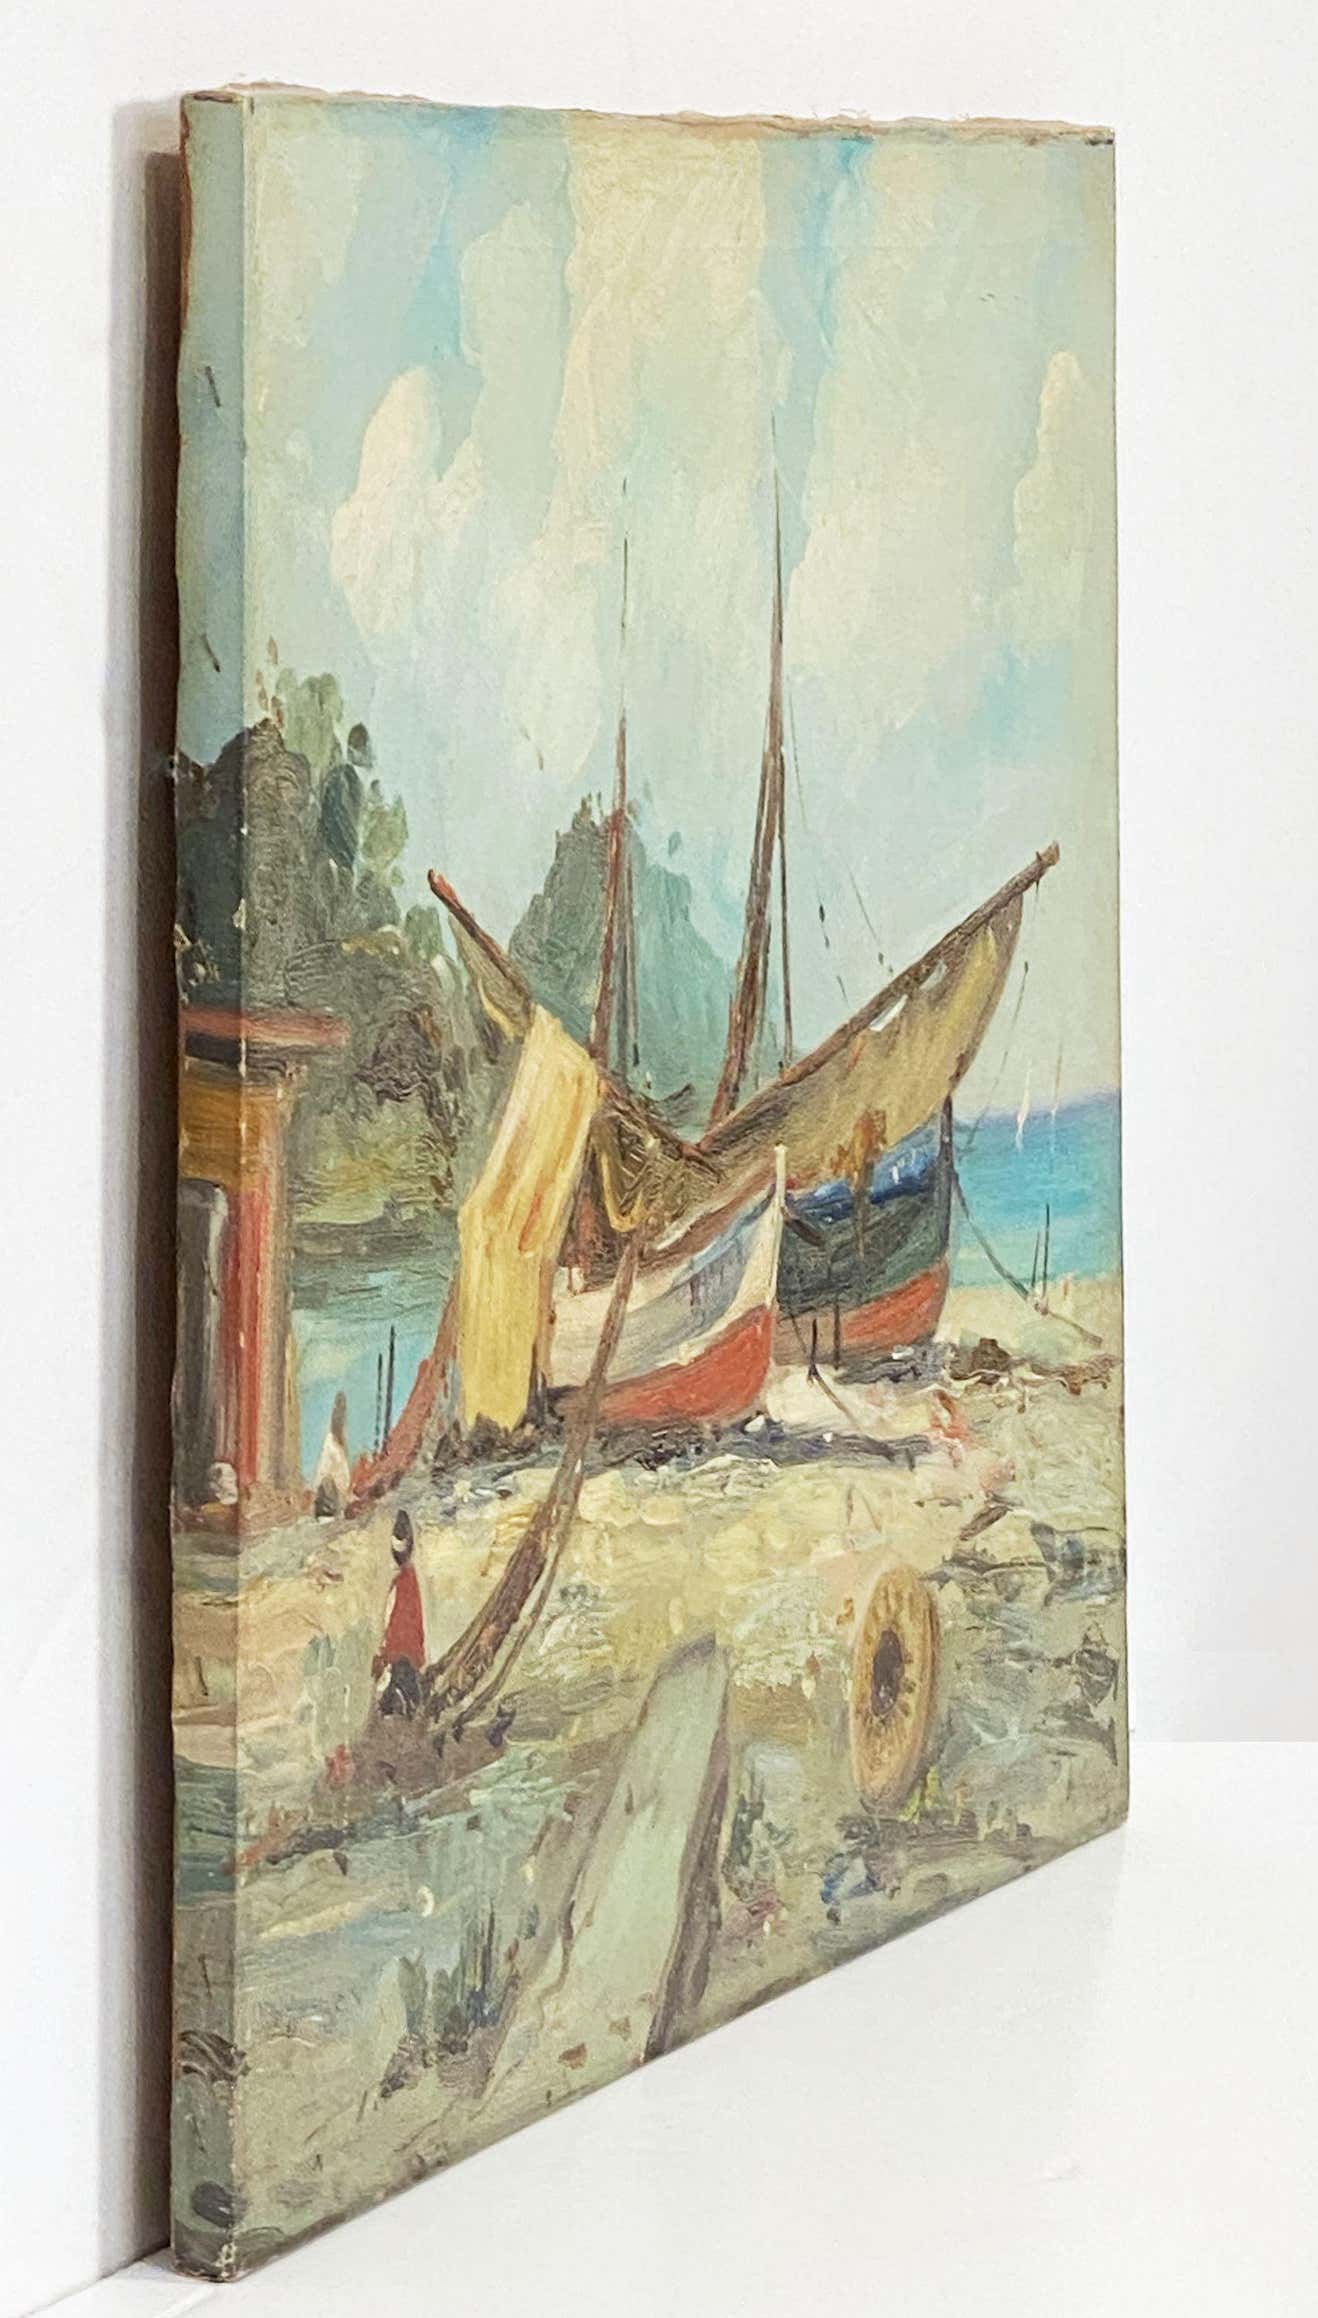 x1566_oil_painting_of_boats_39__master